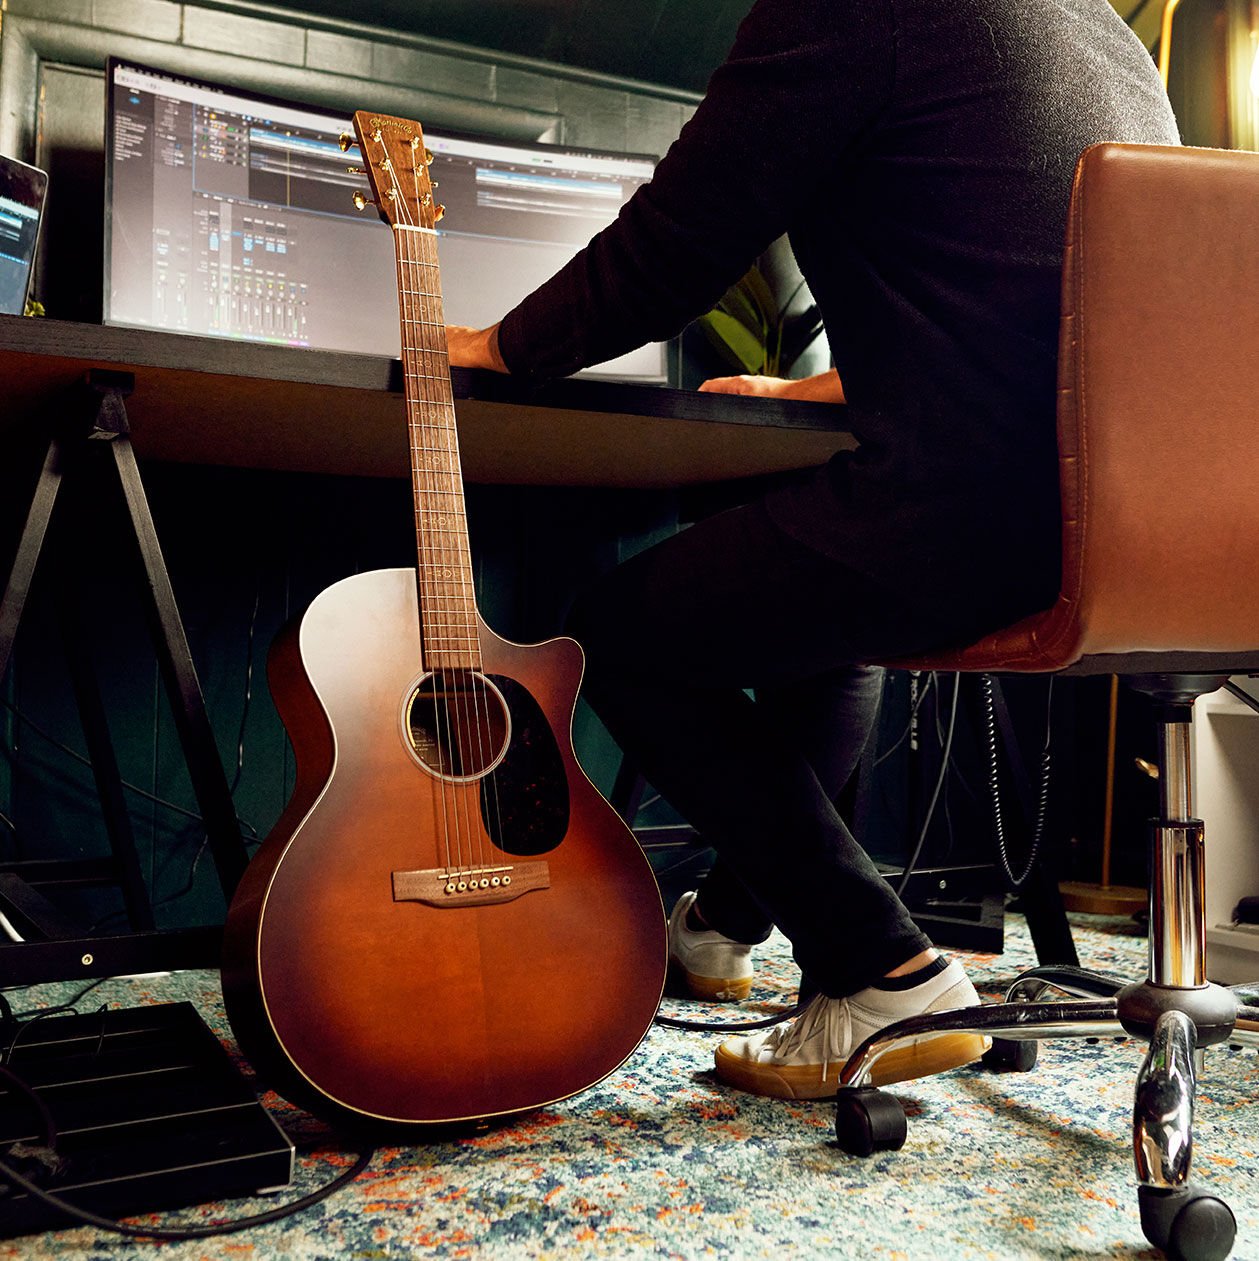 Person at desk with guitar leaning across it